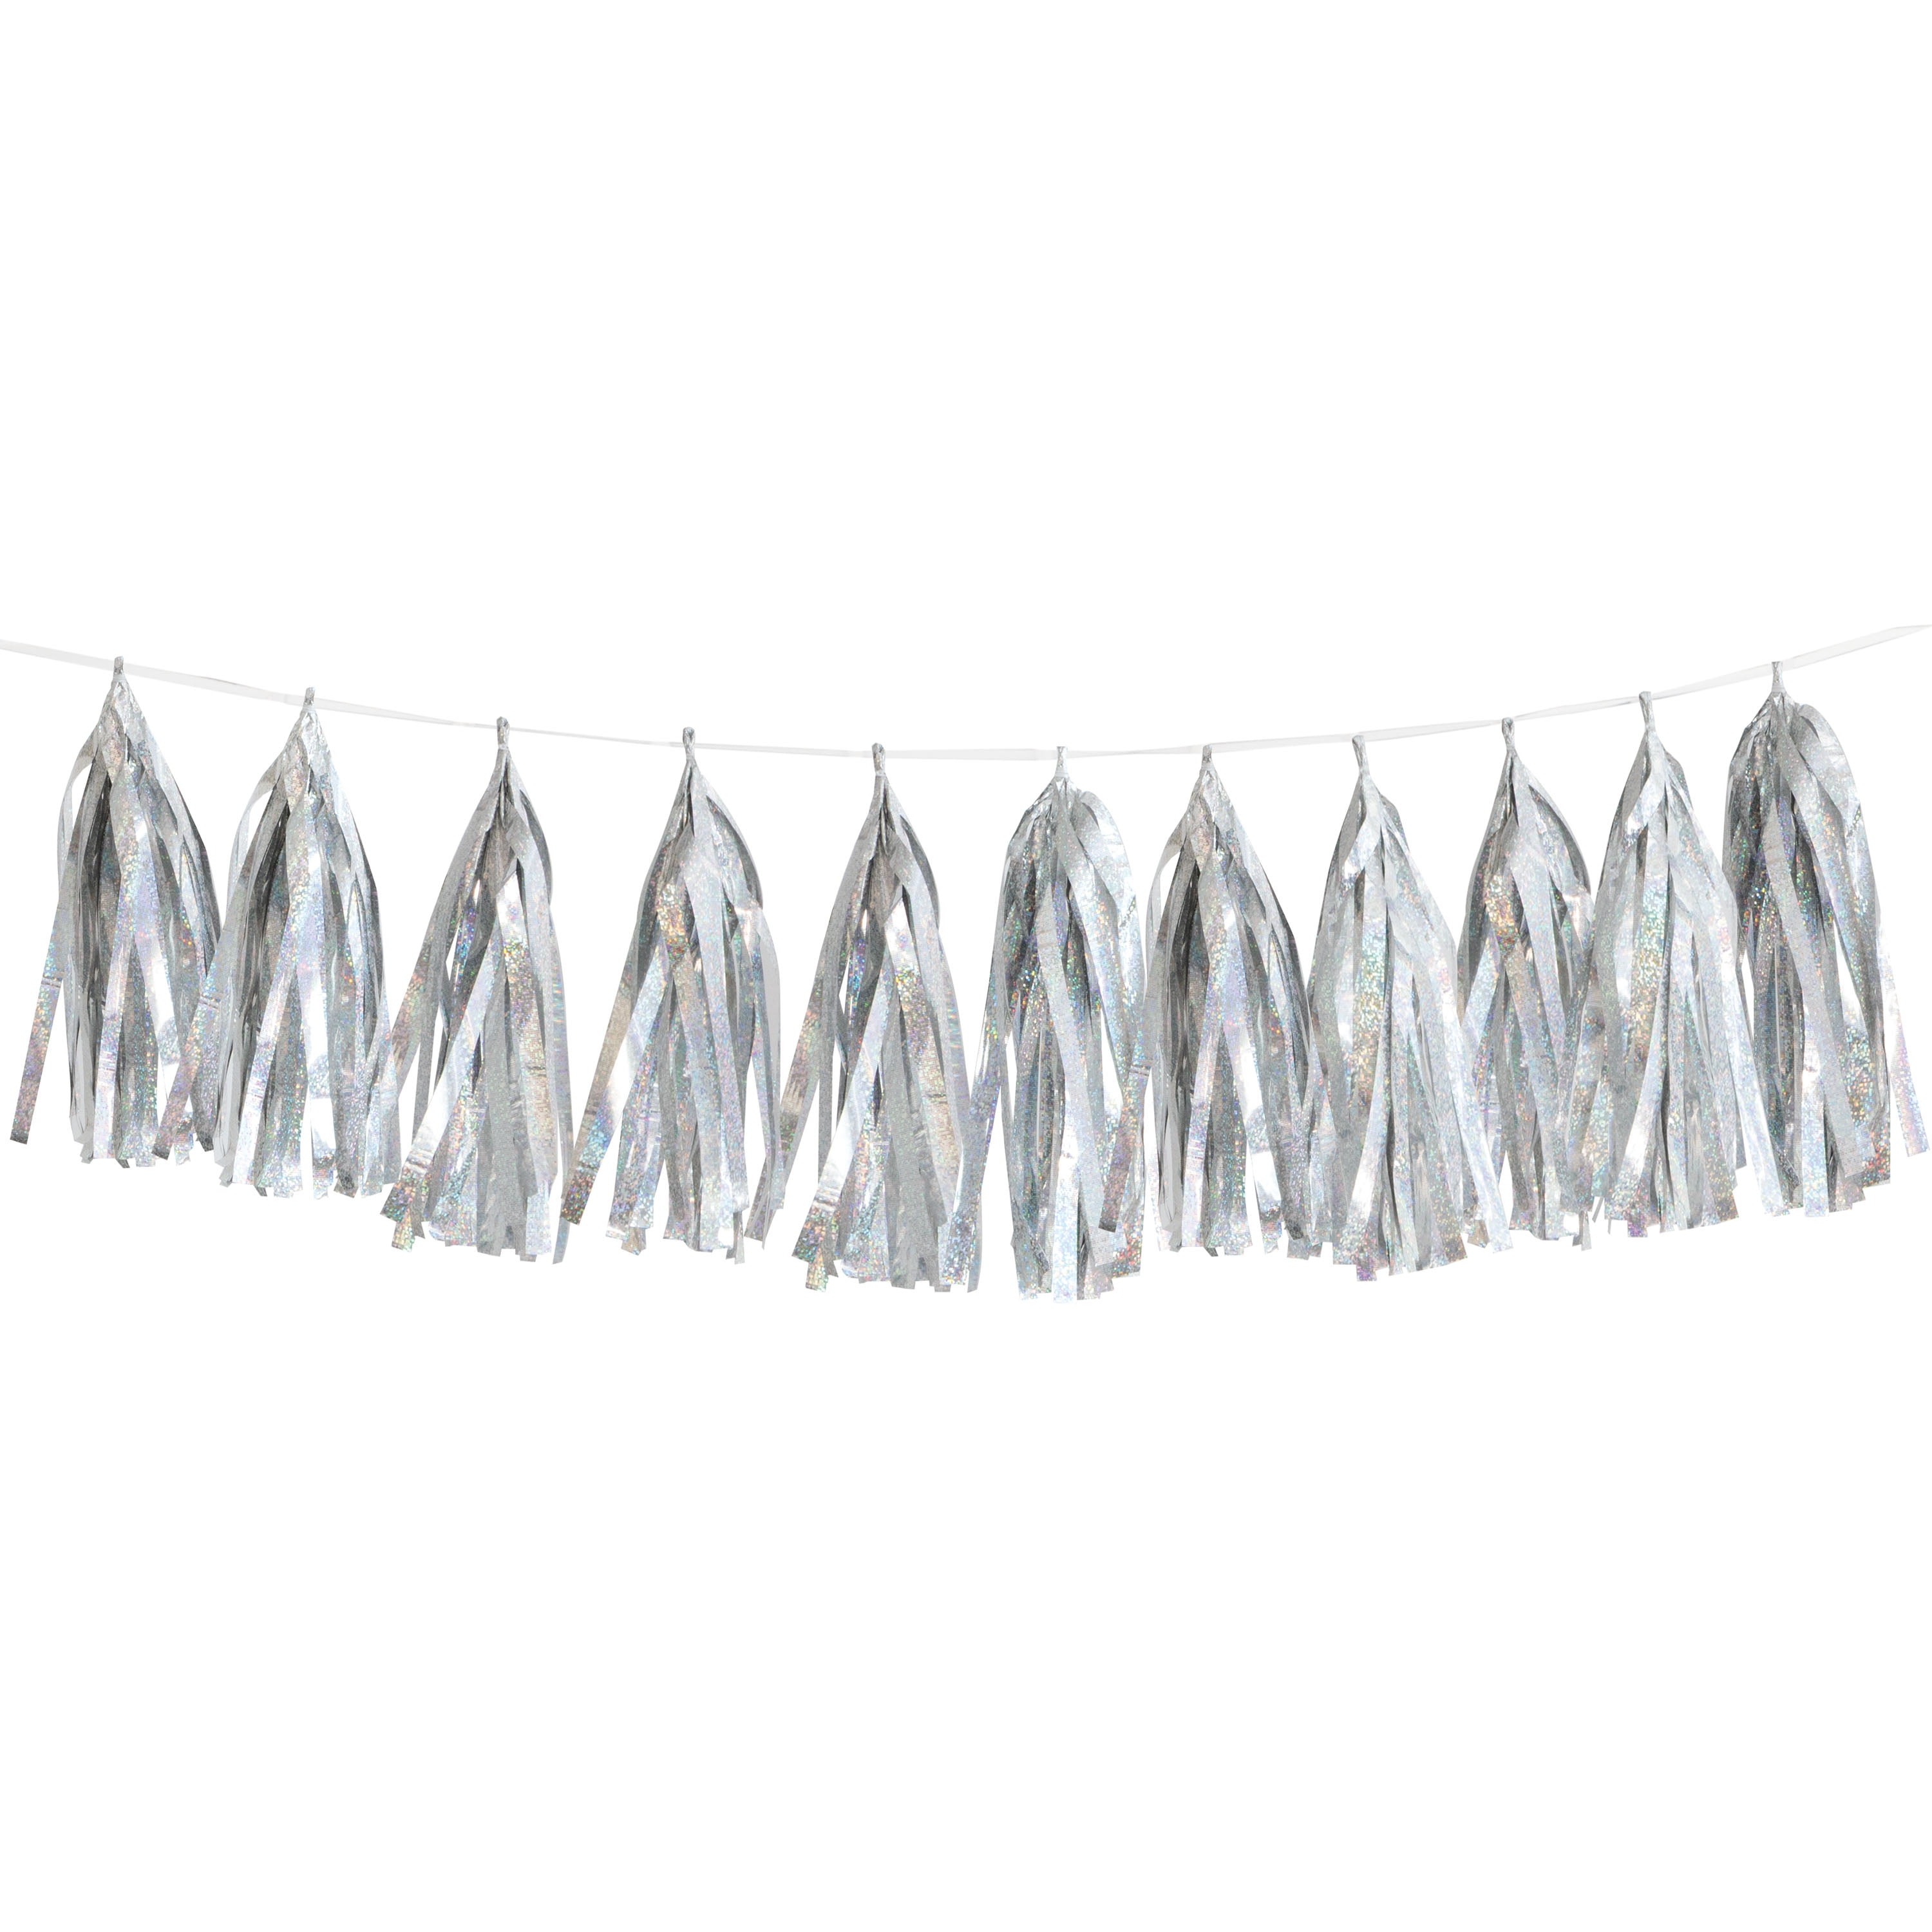 Metallic Chrome Silver Tissue Paper Tassel Garland Kit (4-PACK) On Sale  from PaperLanternStore at the Best Bulk Wholesale Prices. -   - Paper Lanterns, Decor, Party Lights & More